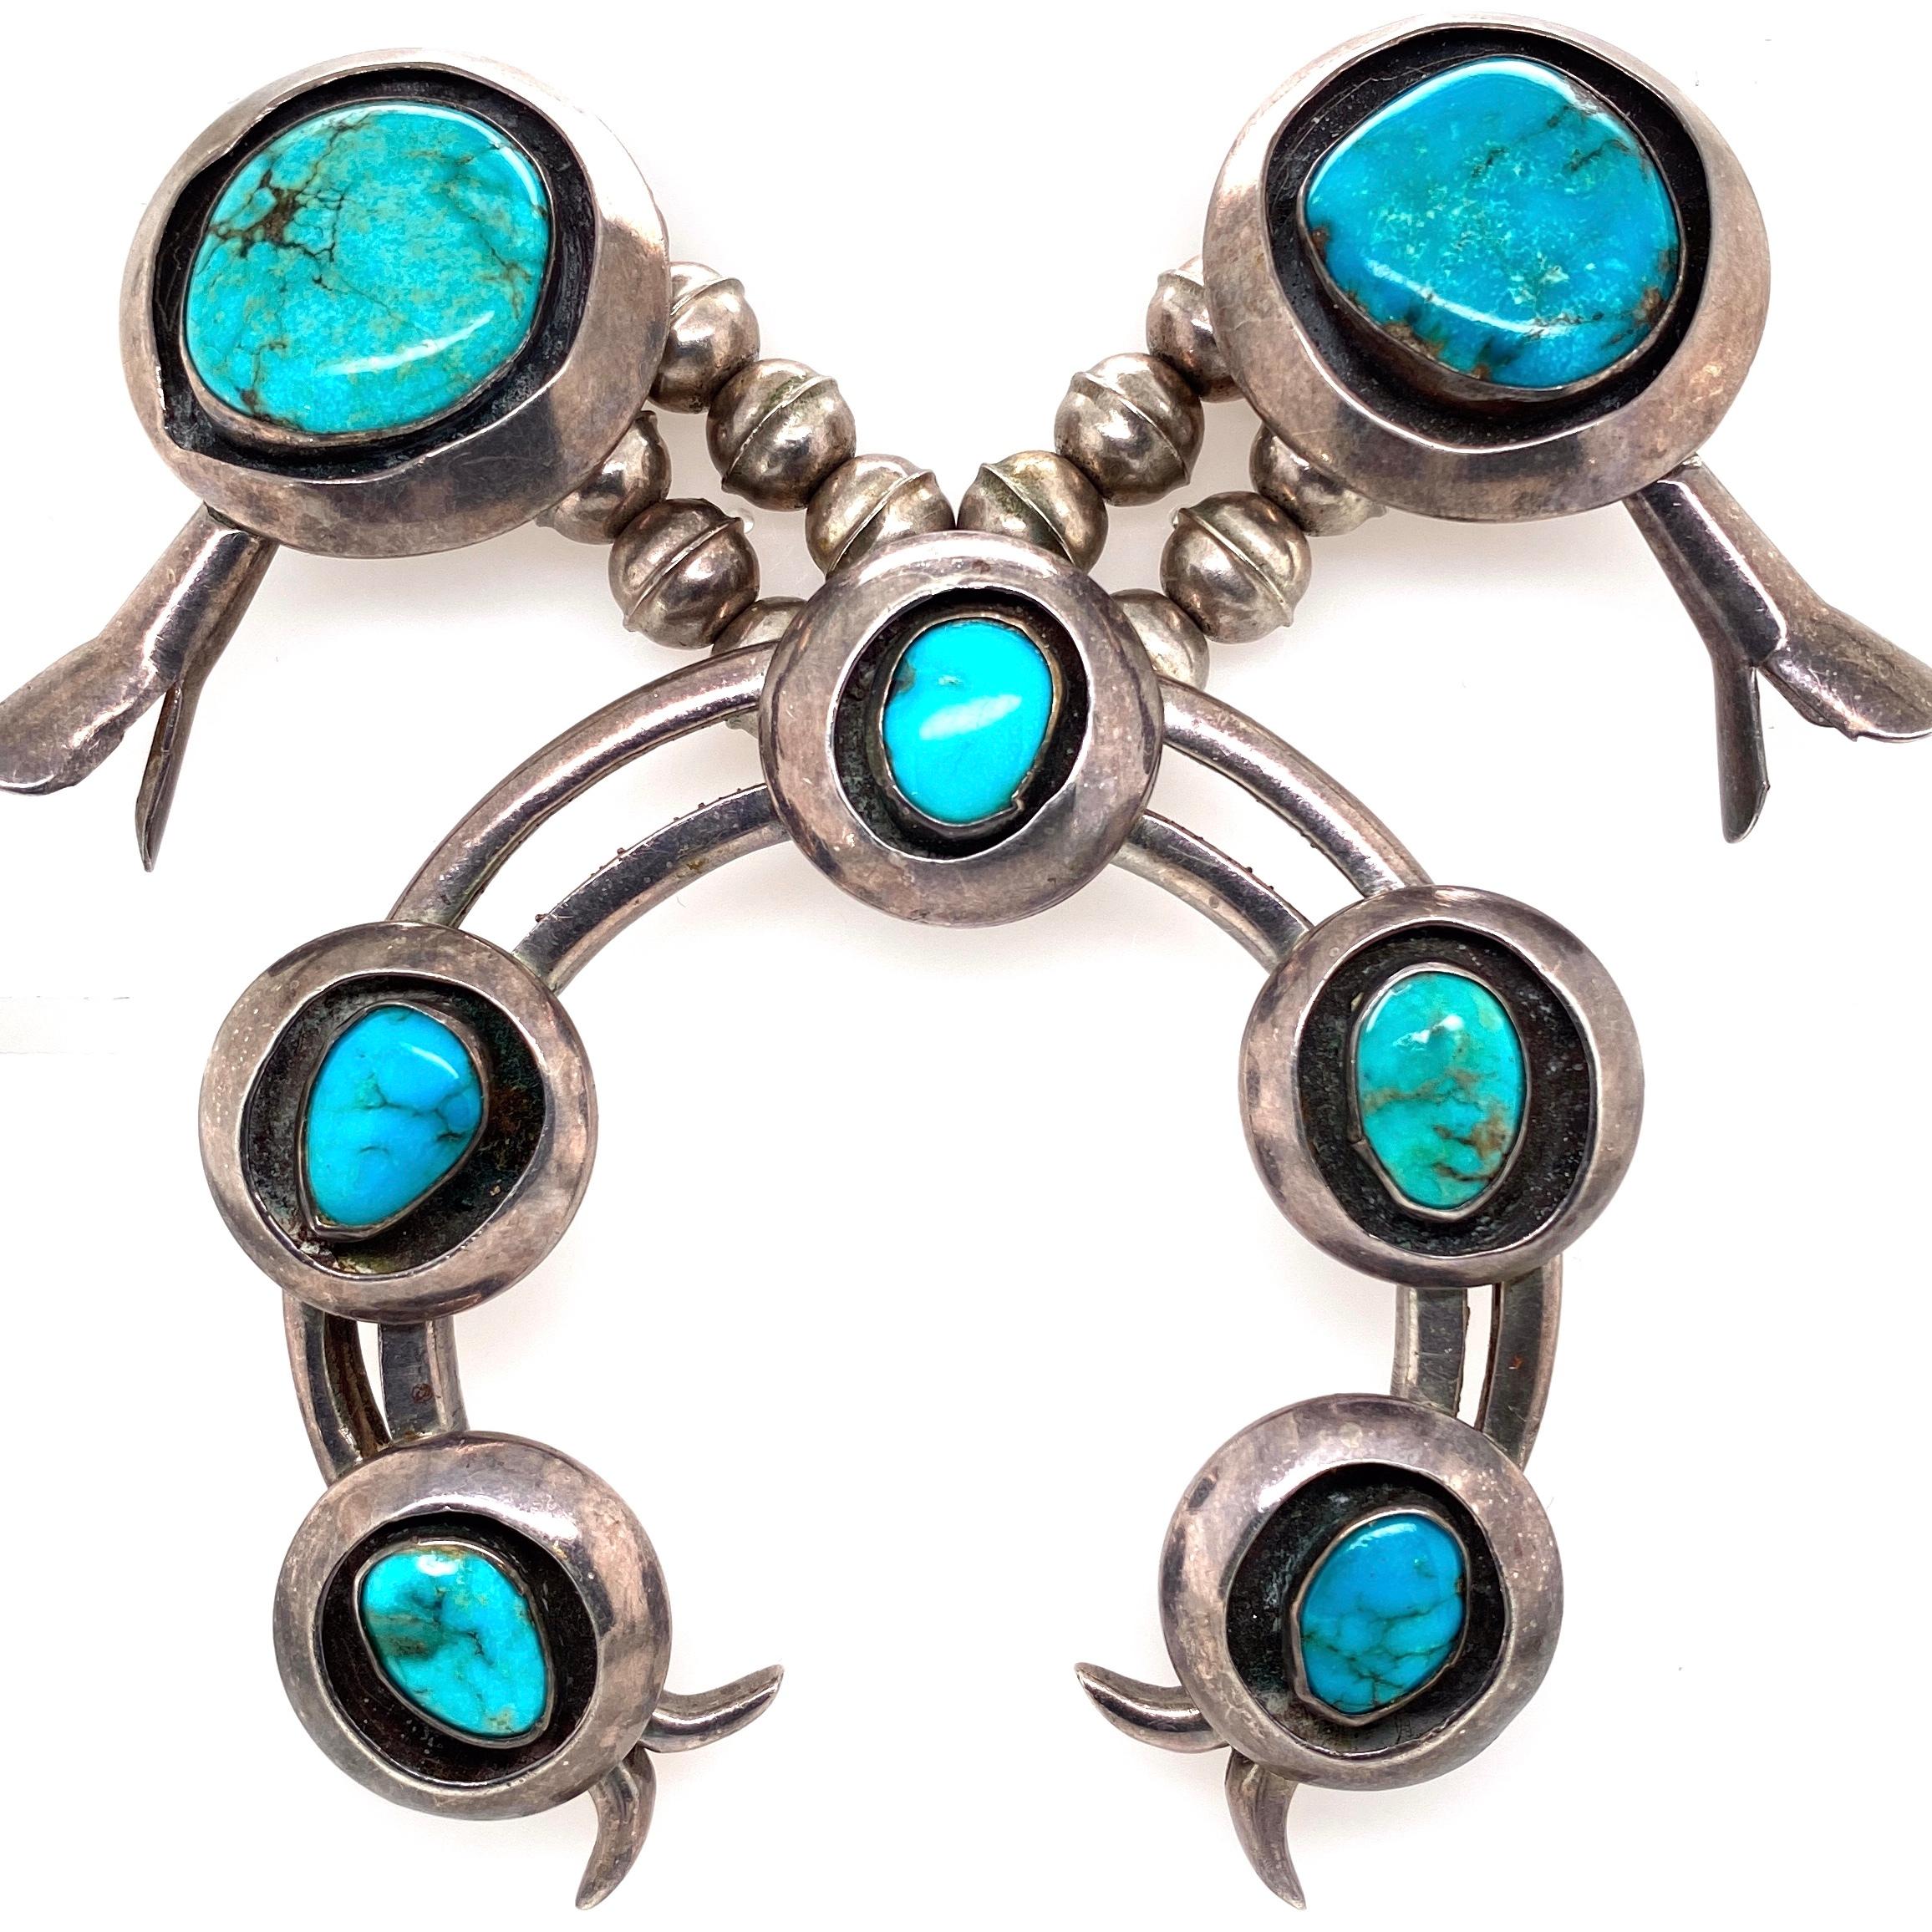 Highly desirable Large Native American original Old Pawn Navajo Squash Blossom Necklace. Featuring 12 Turquoise stations with a large center horseshoe Pendant set with 5 oval Turquoise. Hand crafted 924 Sterling Silver mounting has beautifully